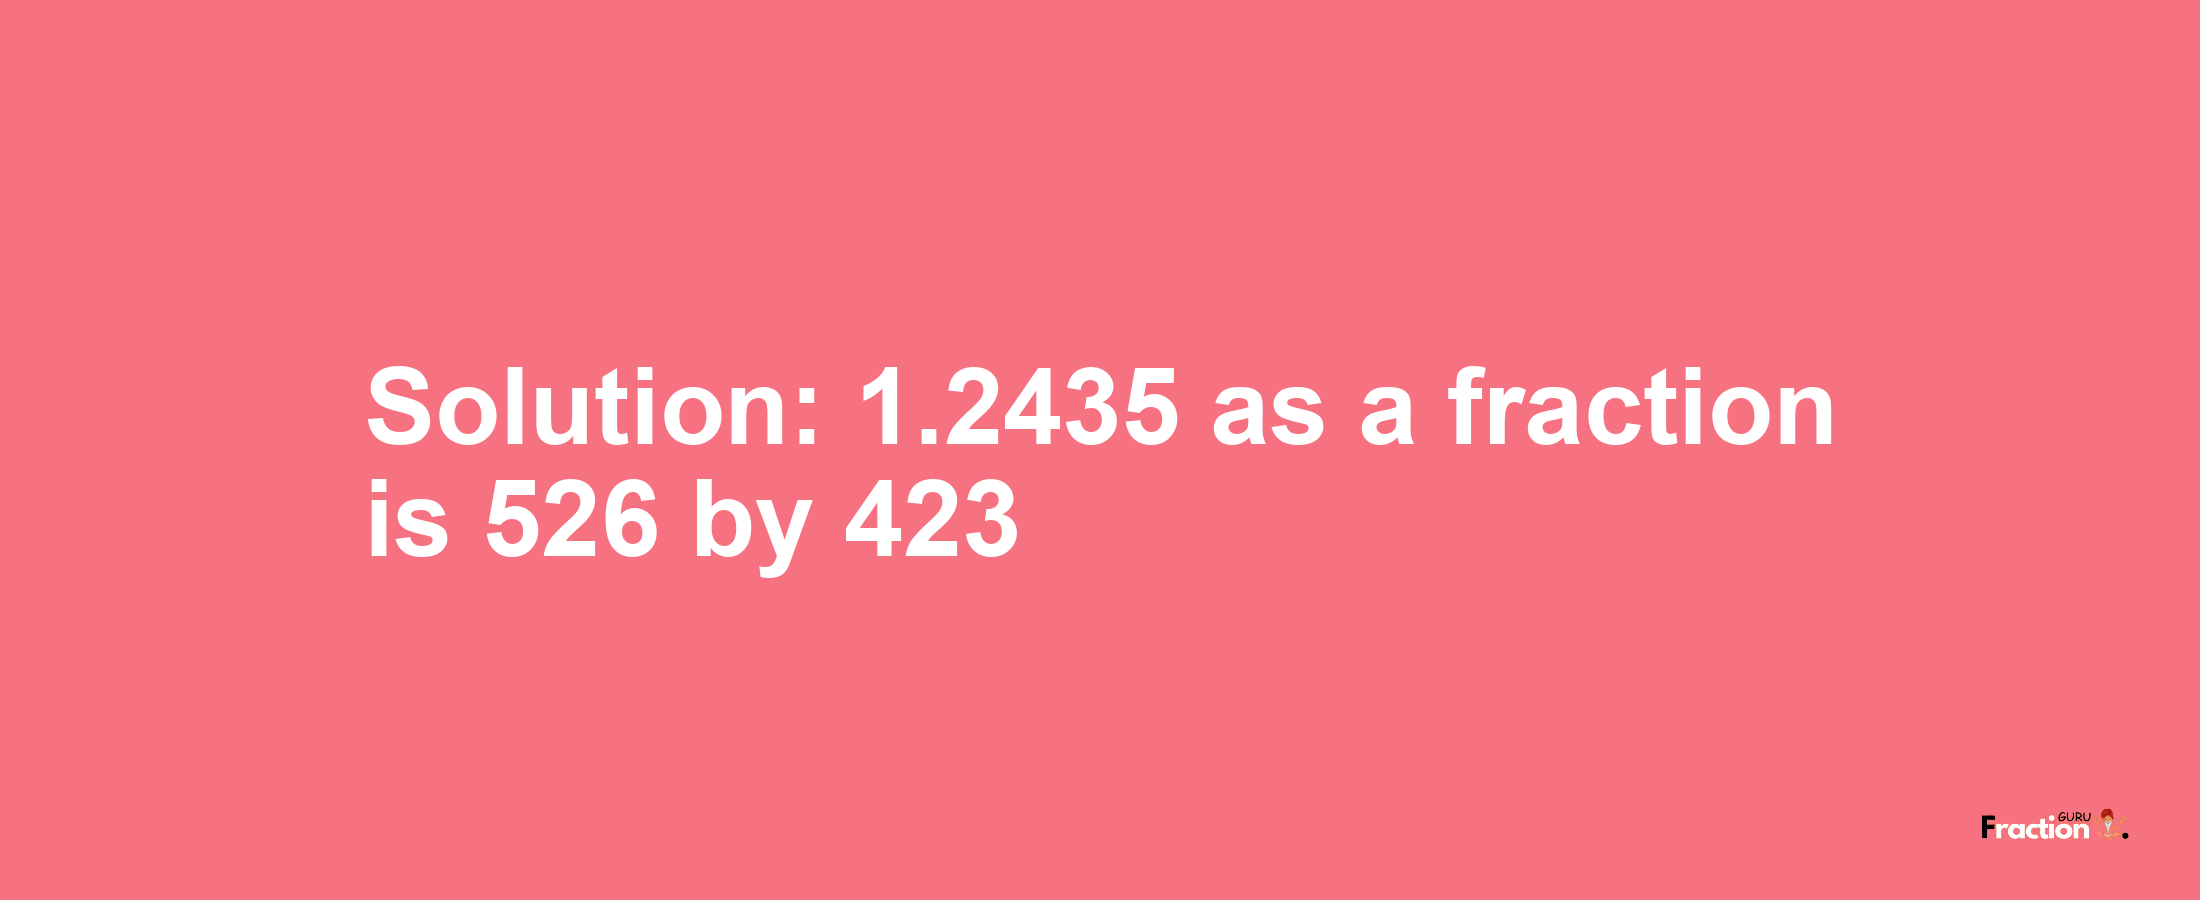 Solution:1.2435 as a fraction is 526/423